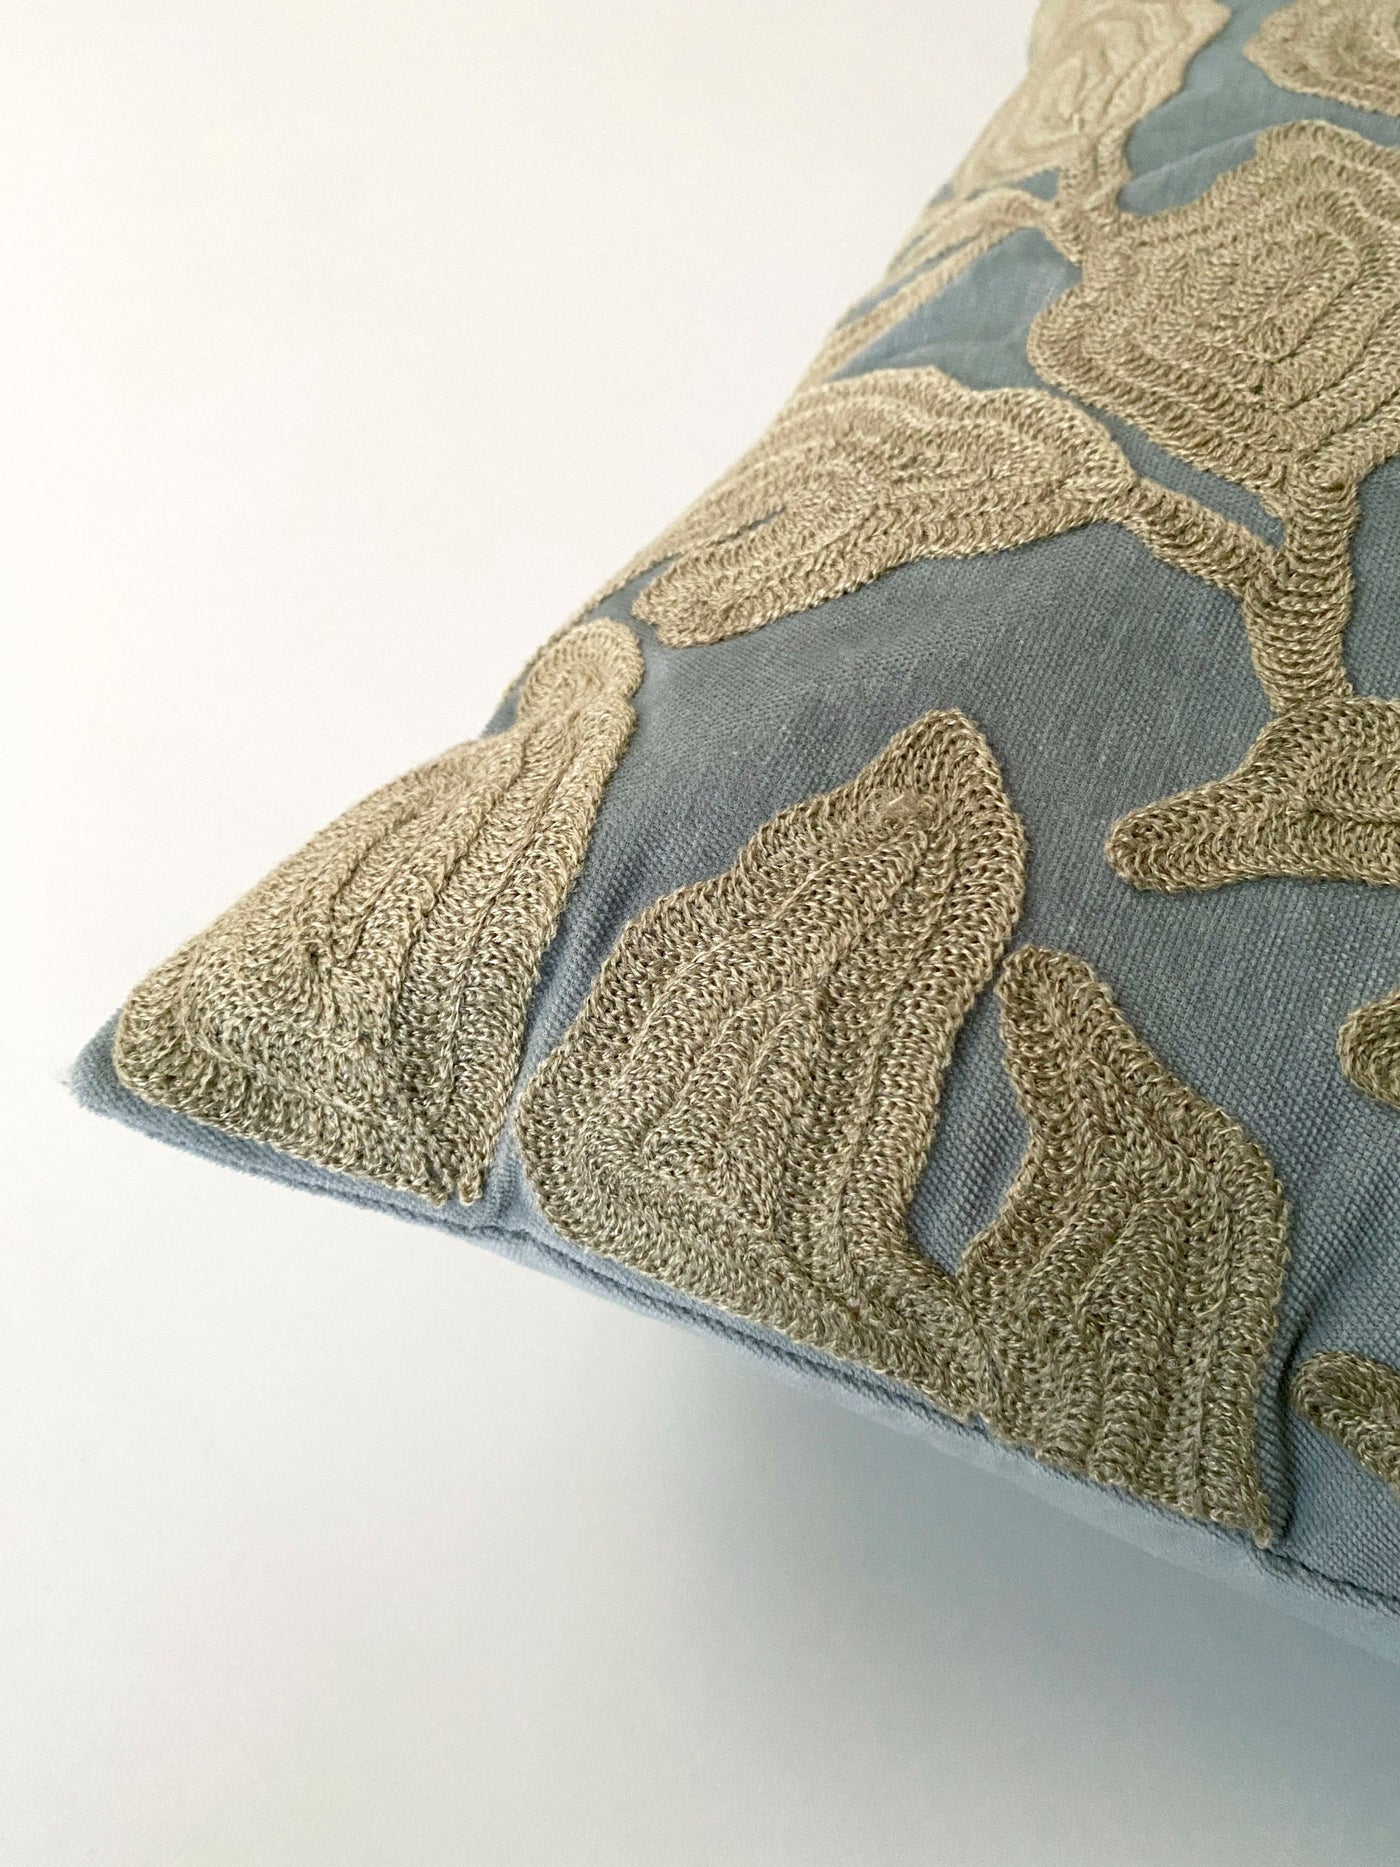 Cascade Embroidered Cushions Covers